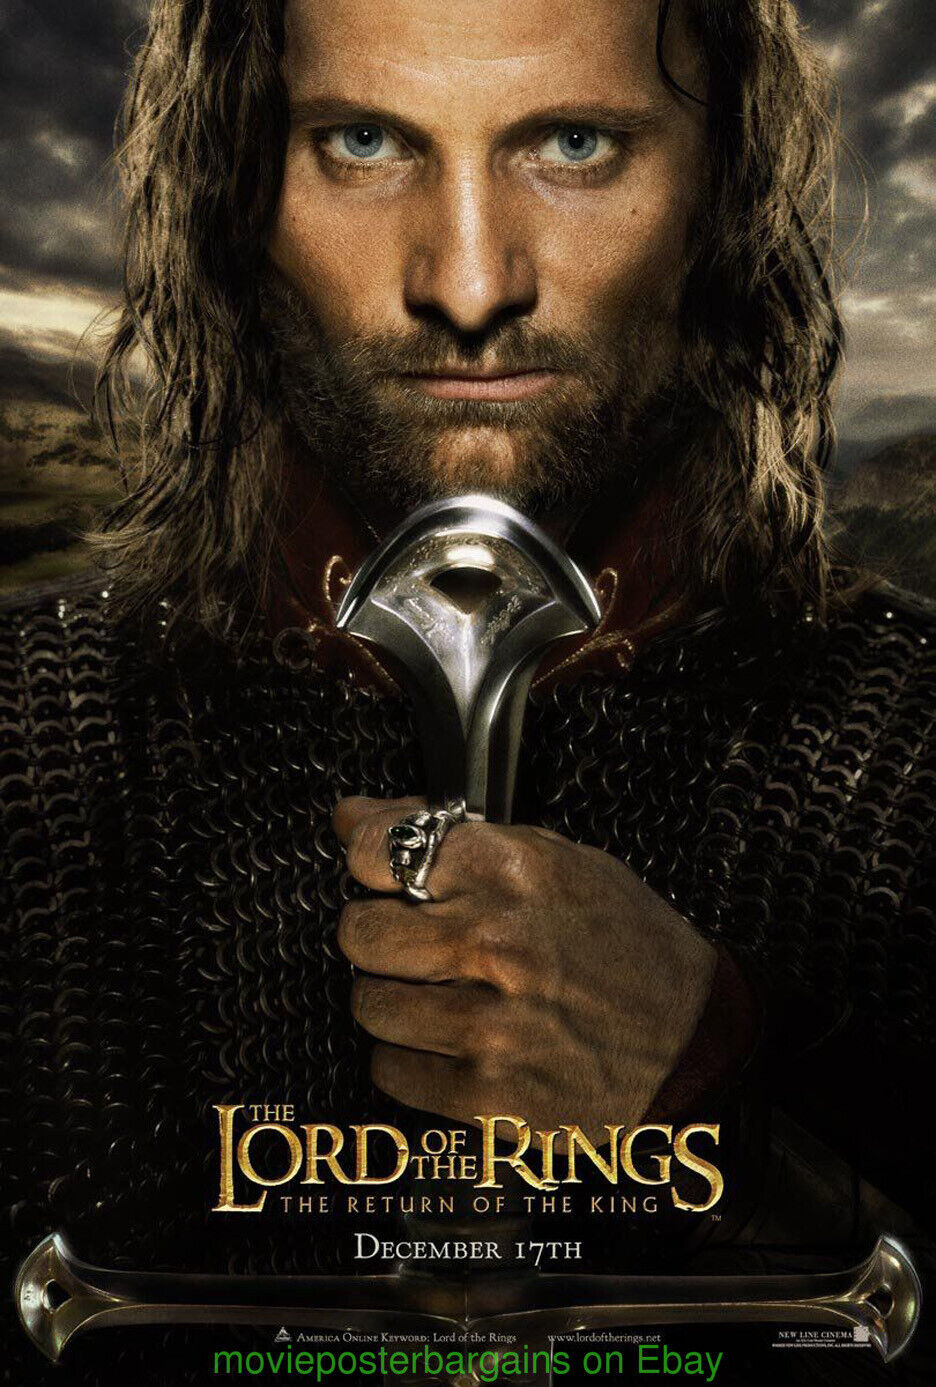 LORD OF THE RINGS RETURN OF THE KING MOVIE POSTER DS 27x40 RARE KING STYLE